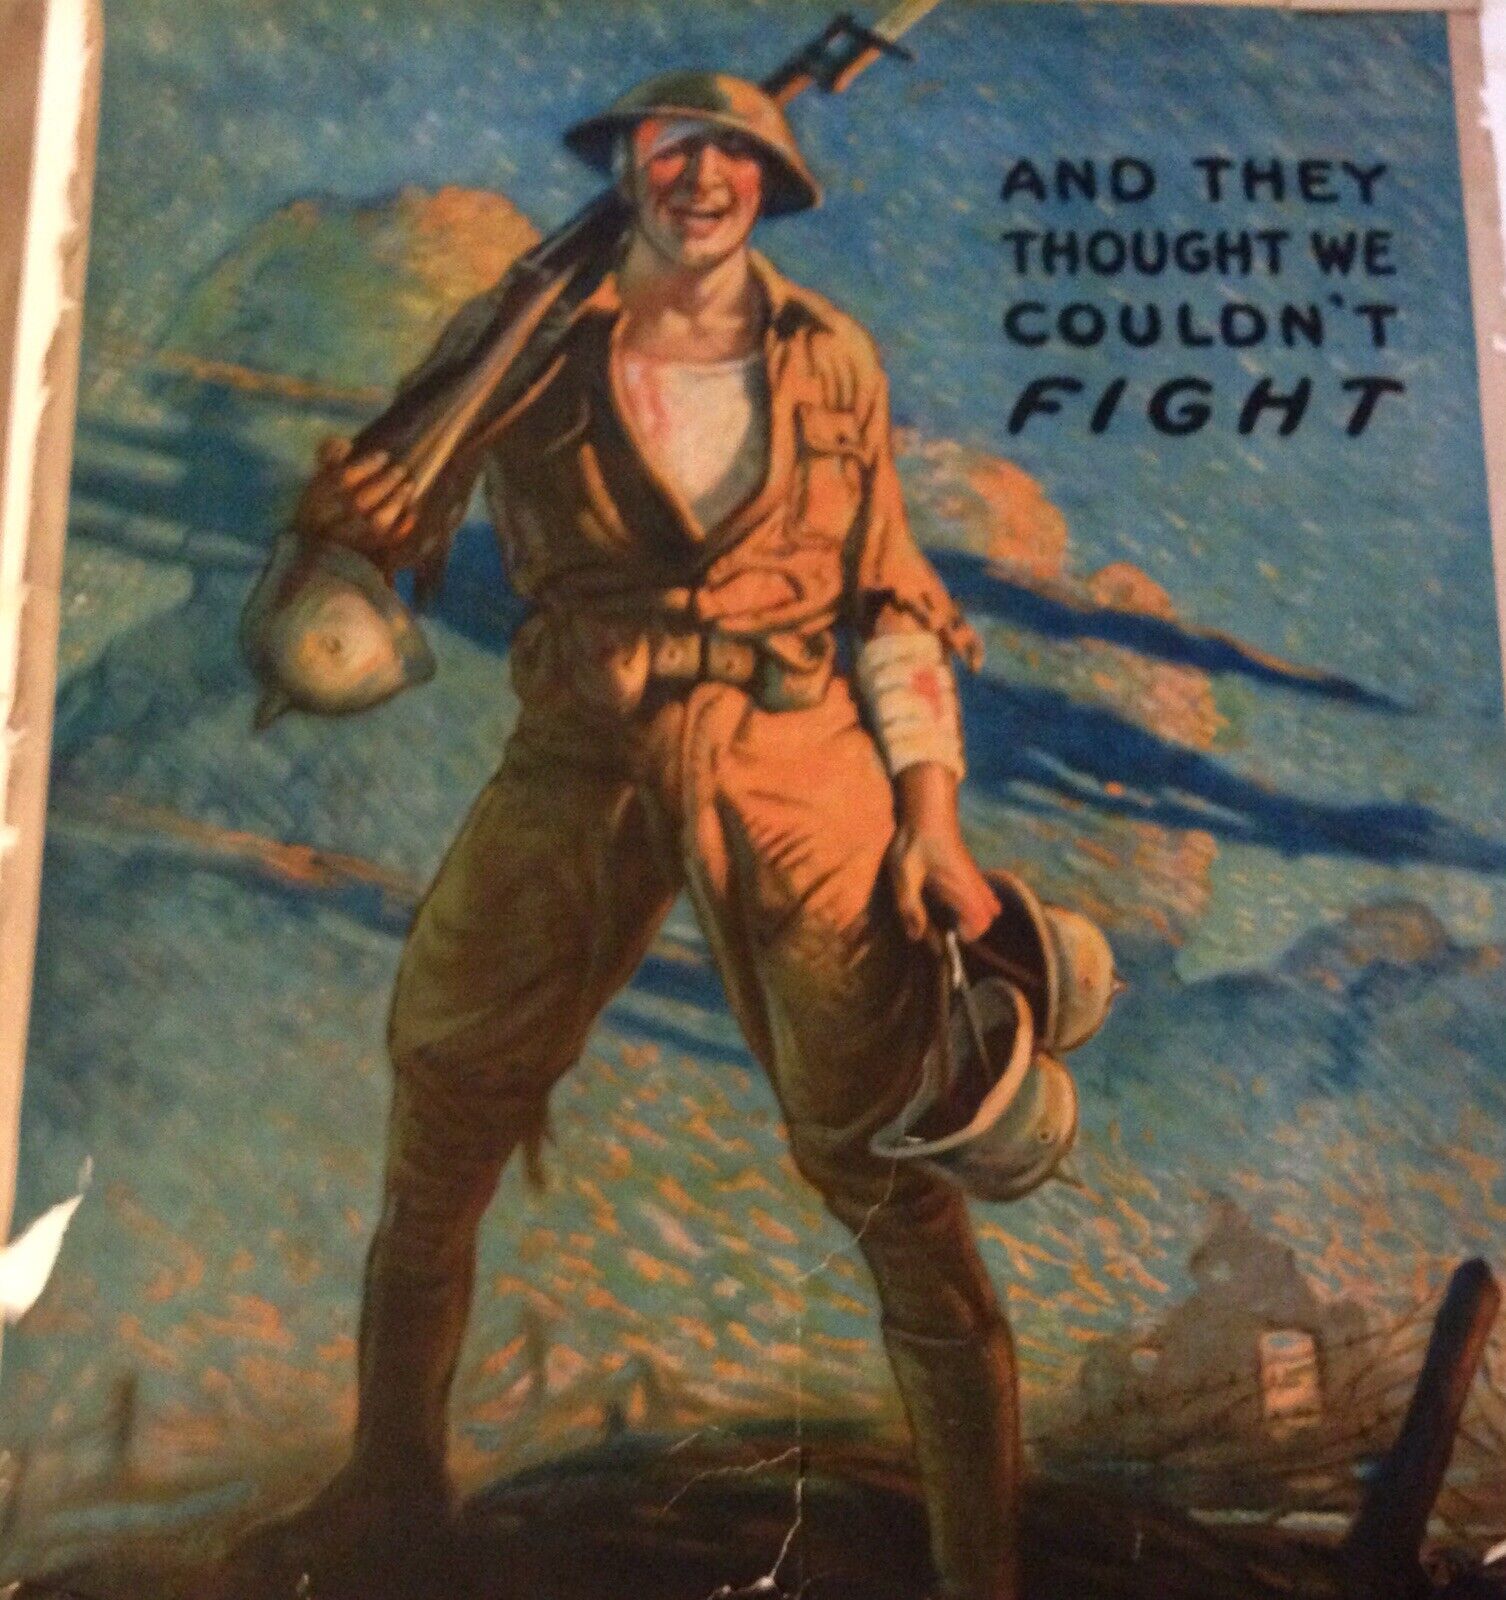 WW1 Orginal 102 Yrs Old Original Poster “And They Said We Couldn’t Fight”